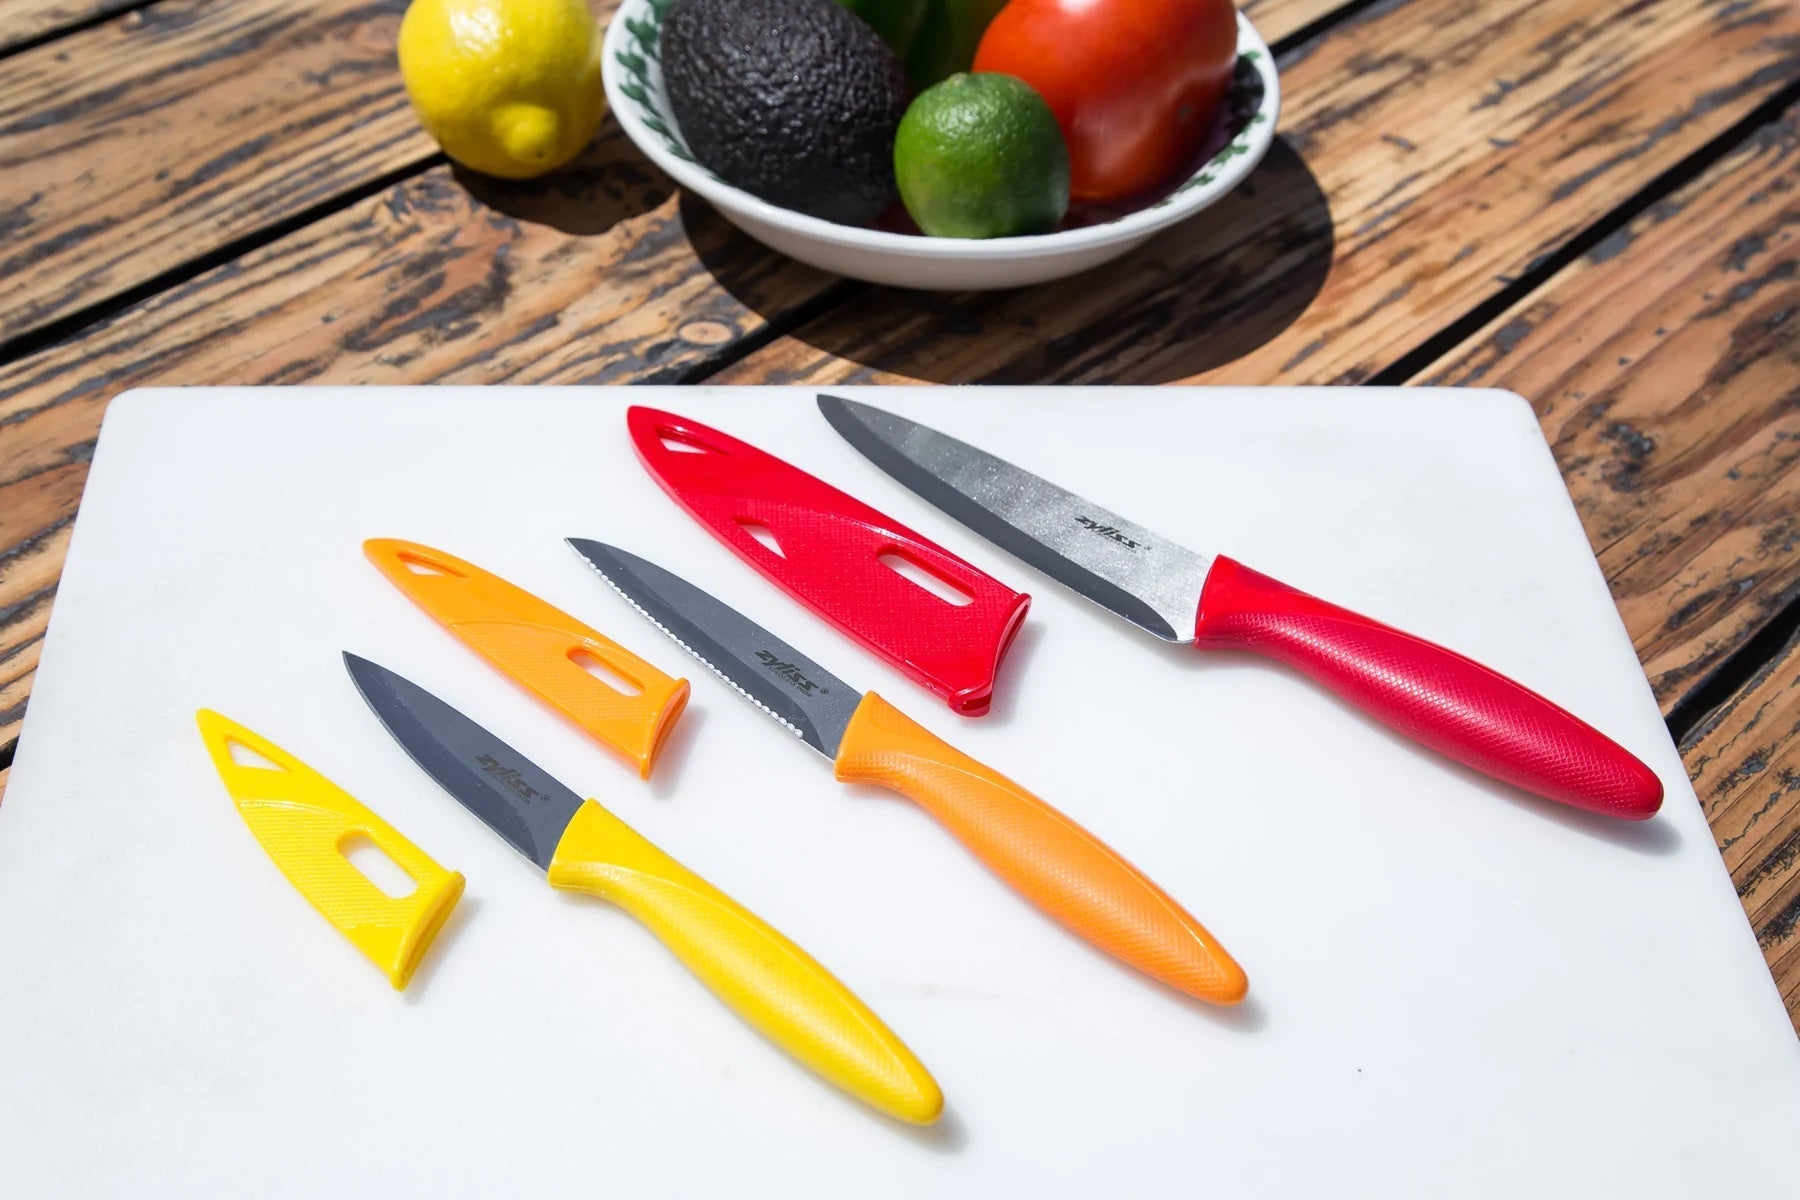 Zyliss knives: The GHI's best knife set is also the cheapest